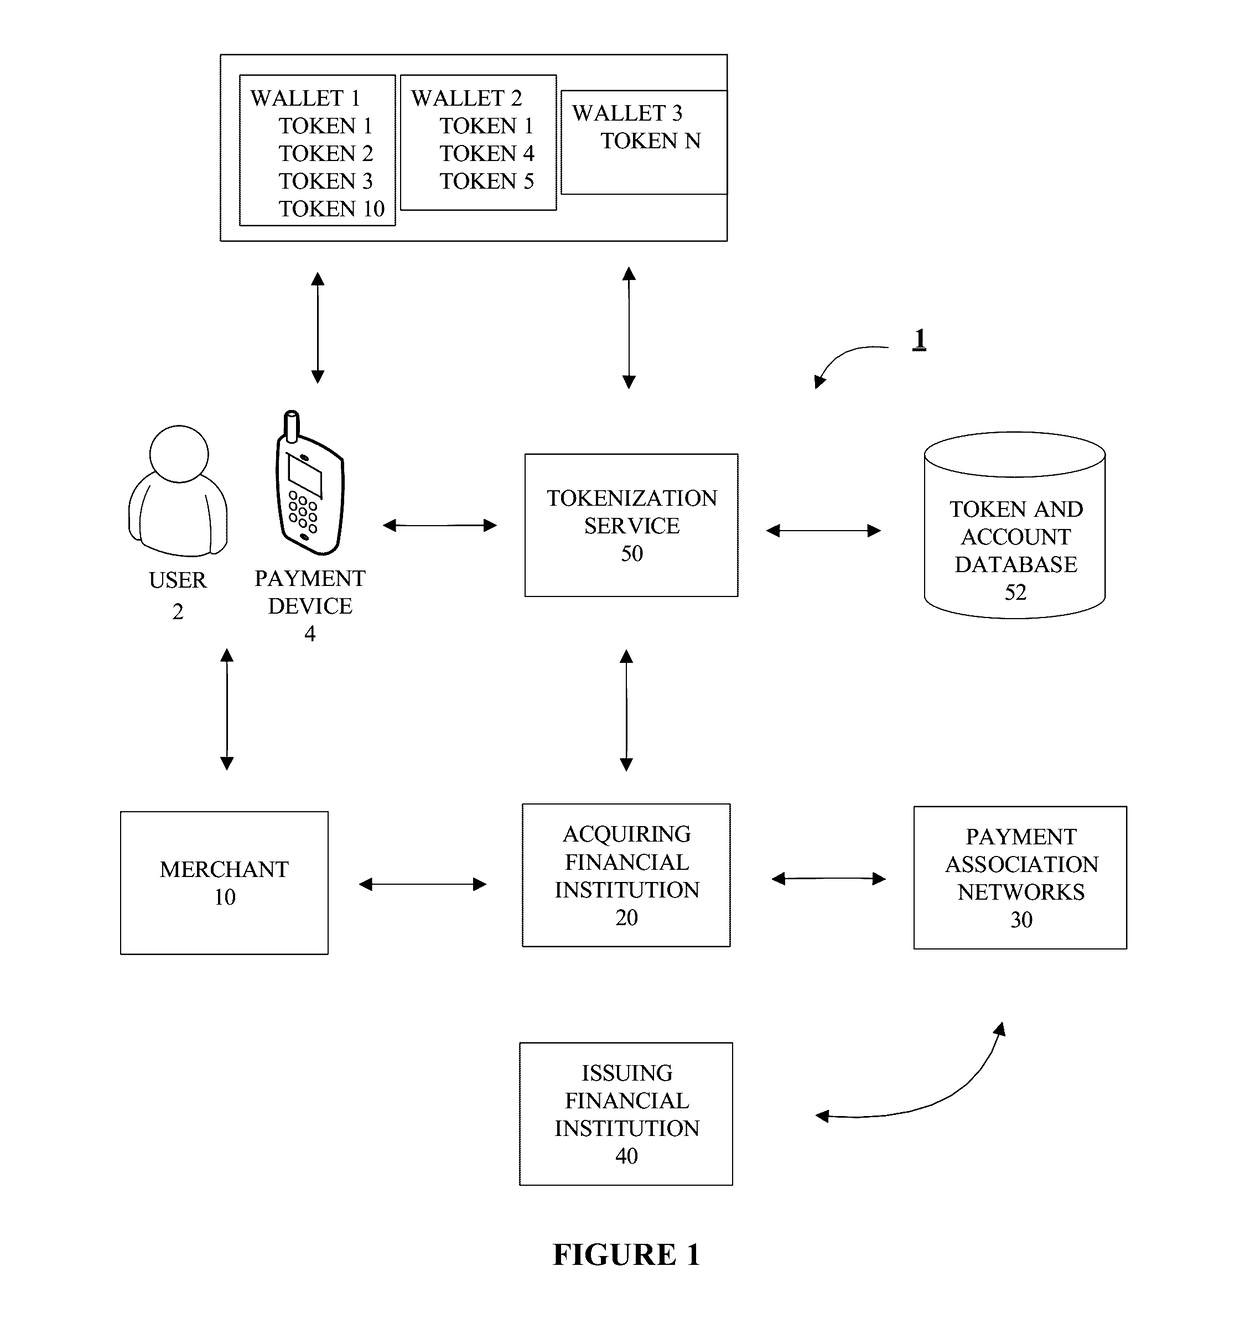 System for electronic collection and display of account token usage and association